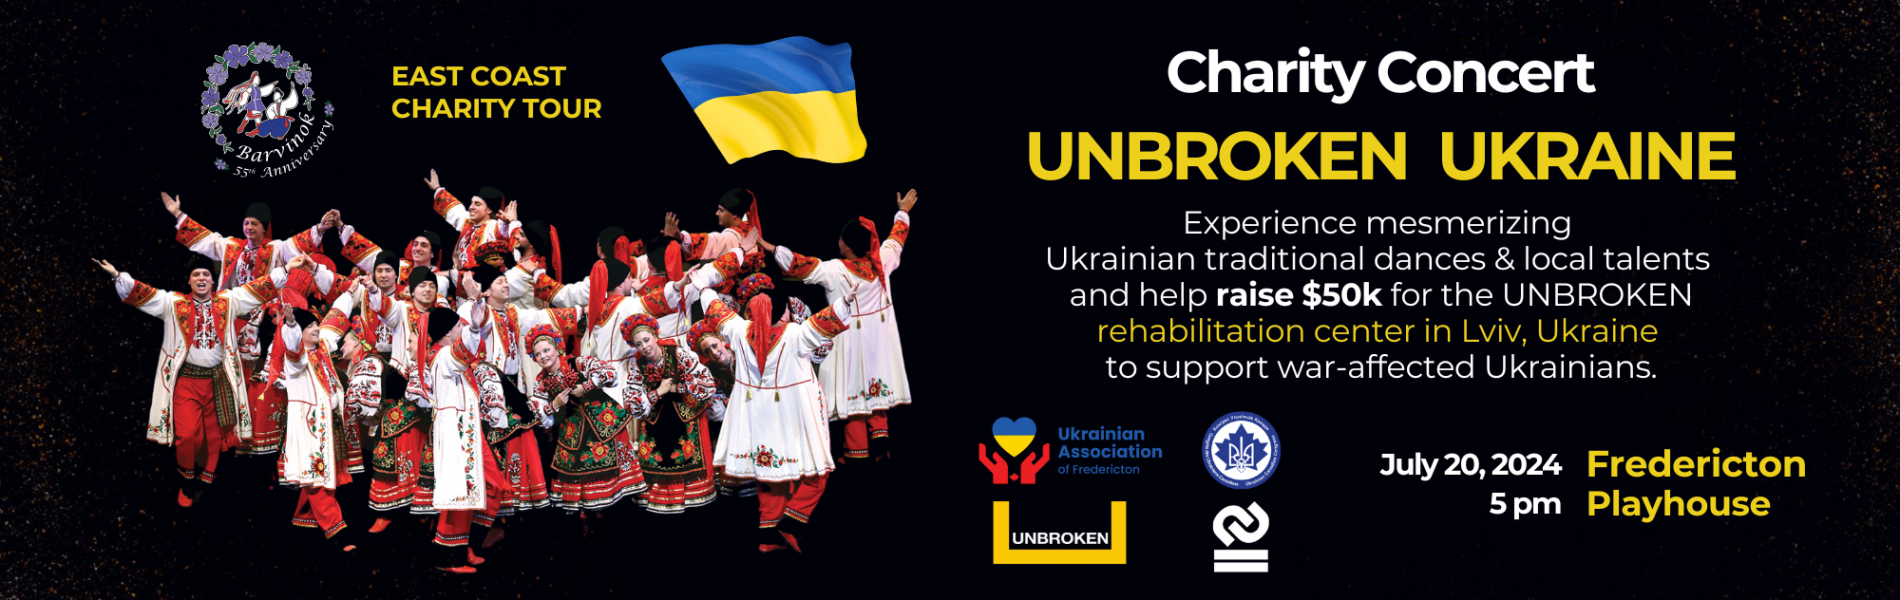 A large group of people dressed in traditional Ukrainian outfits with their arms raised with the words Charity Concert Unbroken Ukraine on the right.